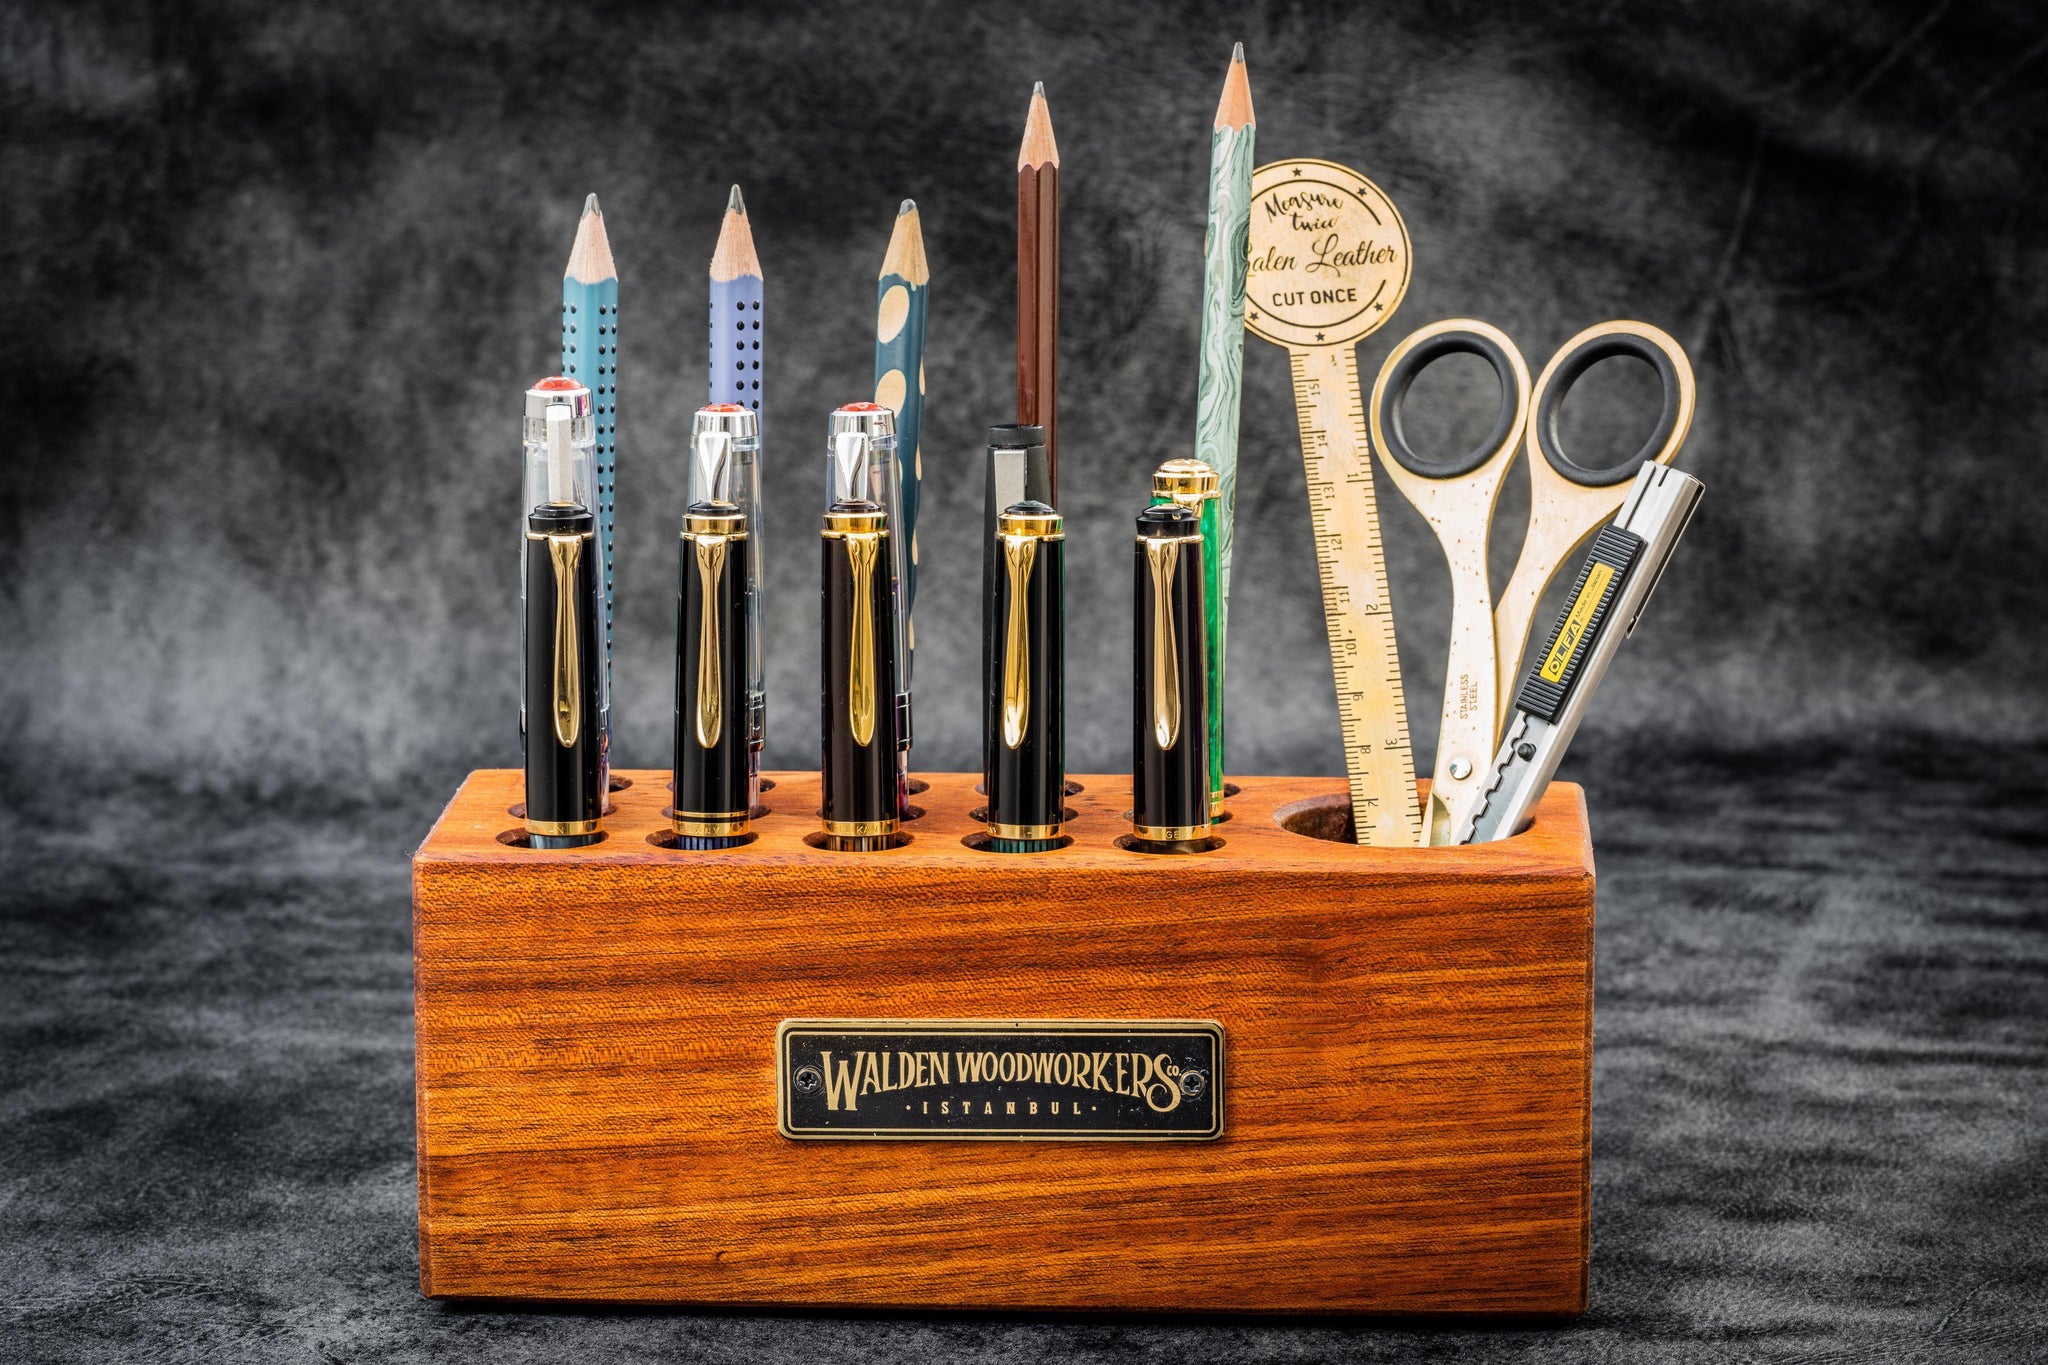 Small Wooden Desk Caddy, Wooden Pencil and Pen Holder, Wood Desk